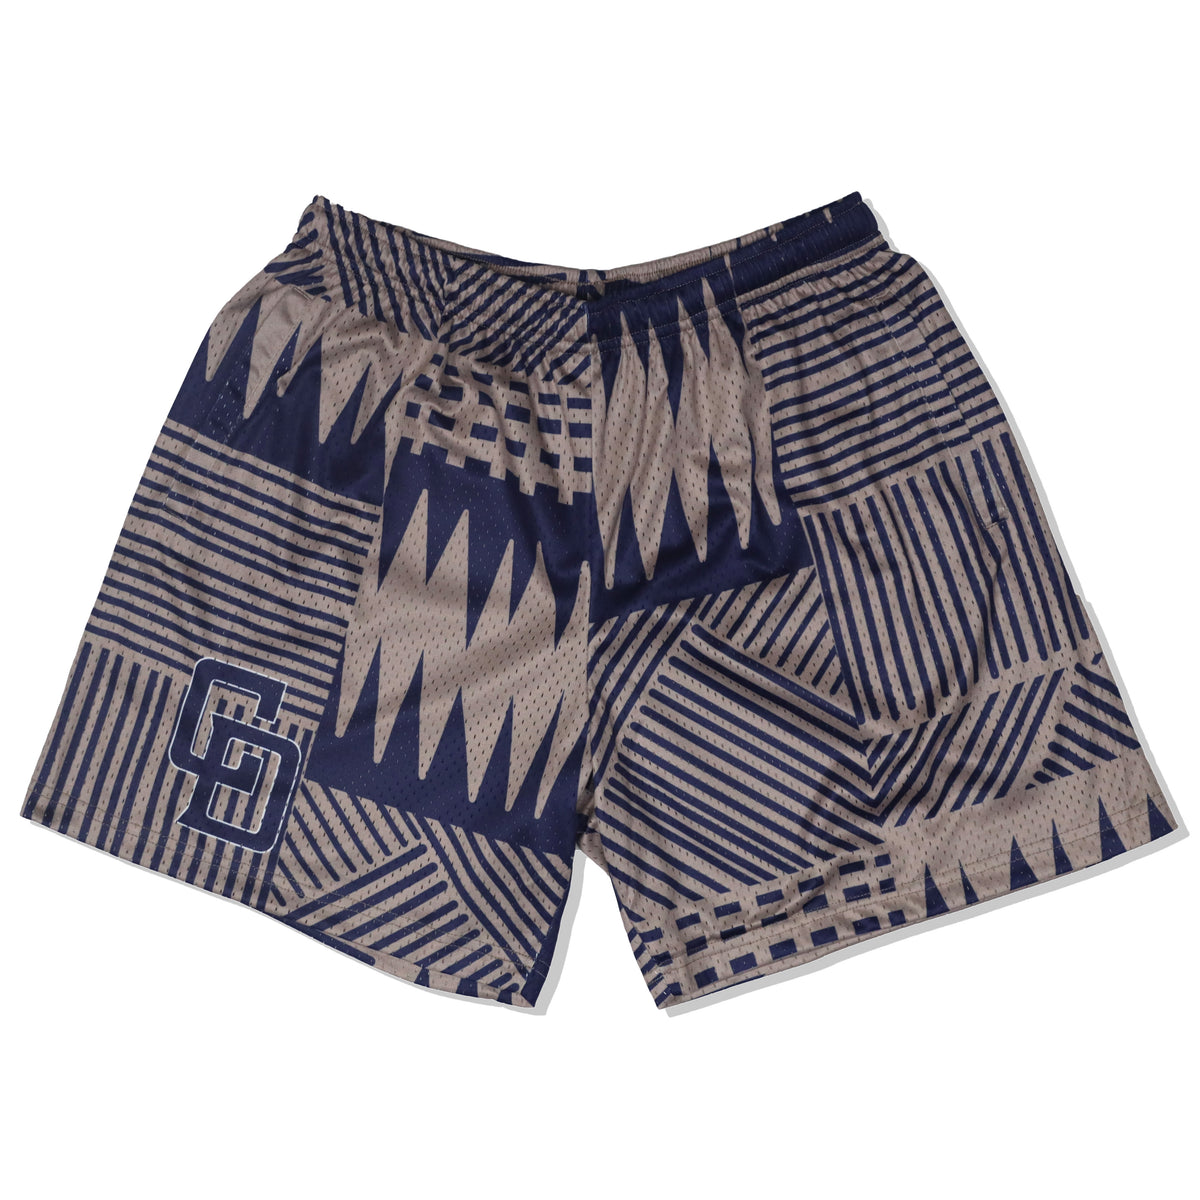 Gallery Place Mesh Shorts – Capital District